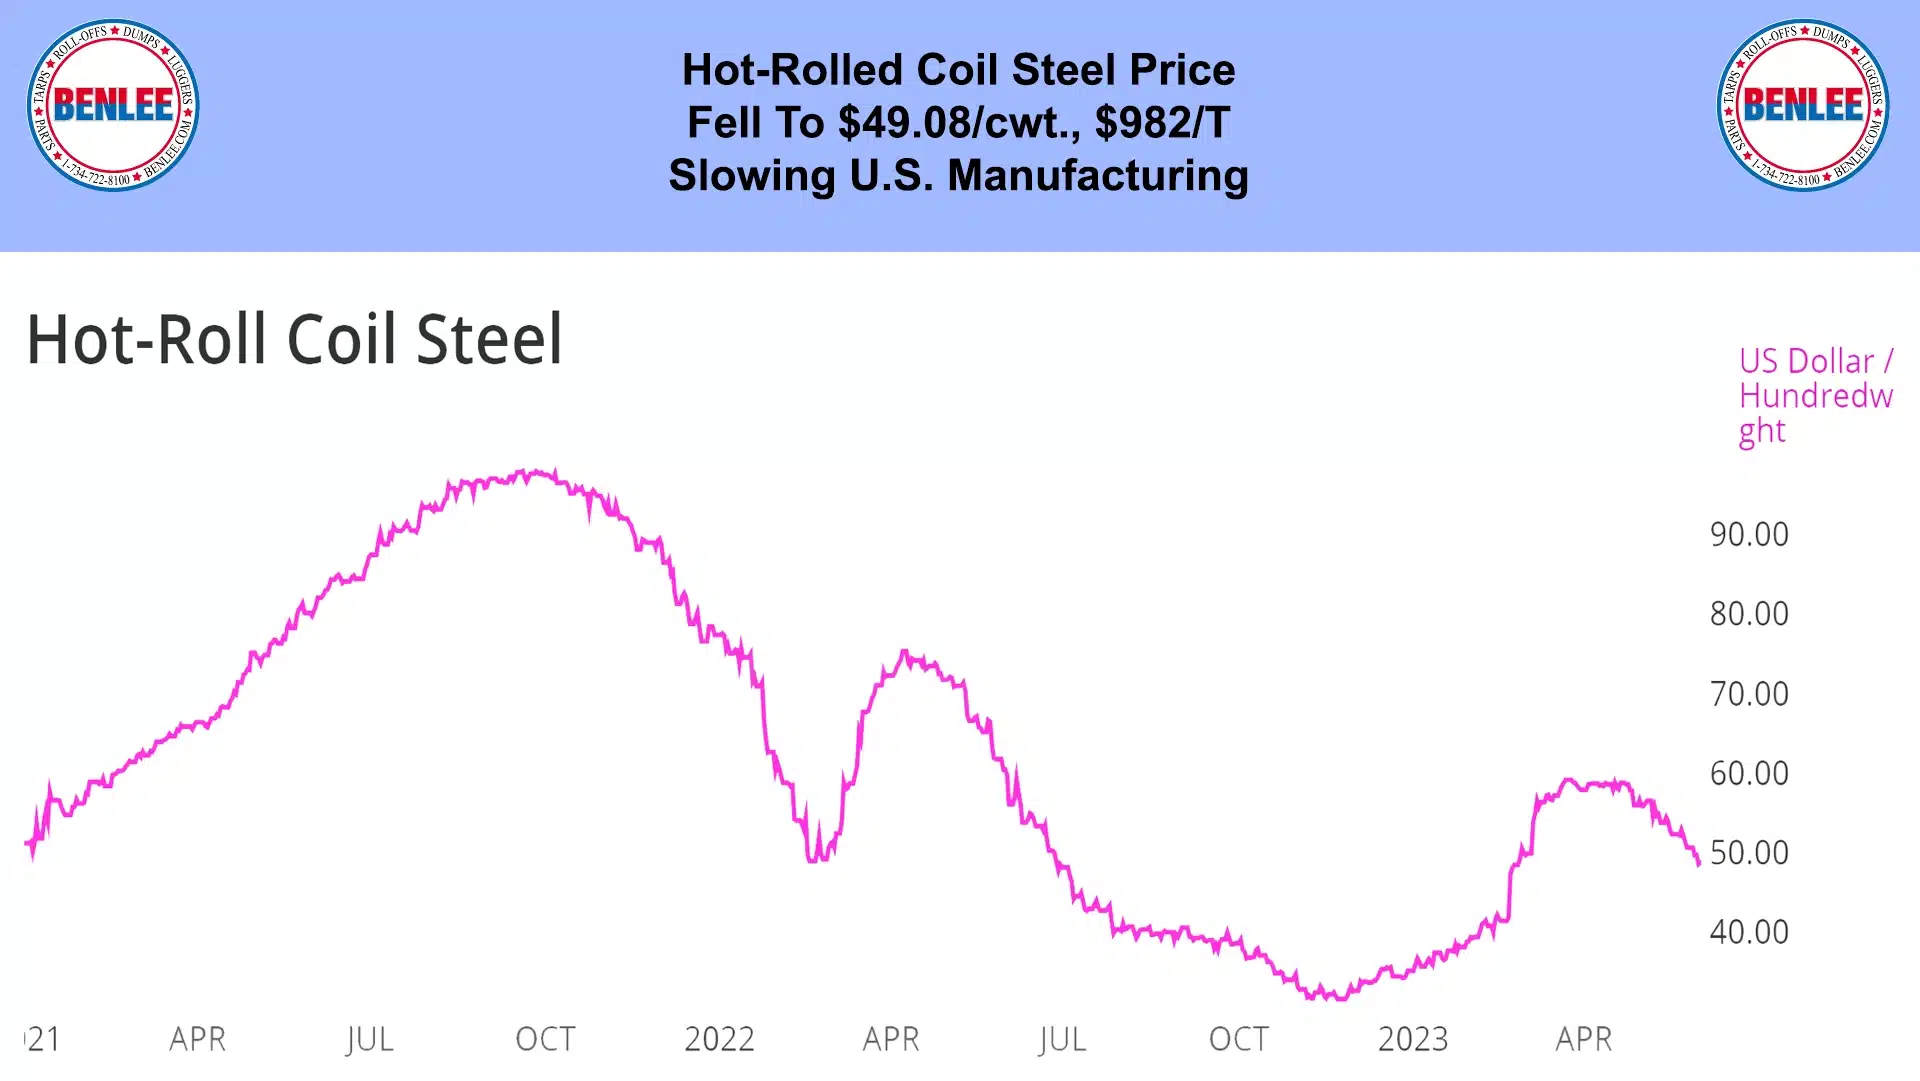 Hot Roll Coil